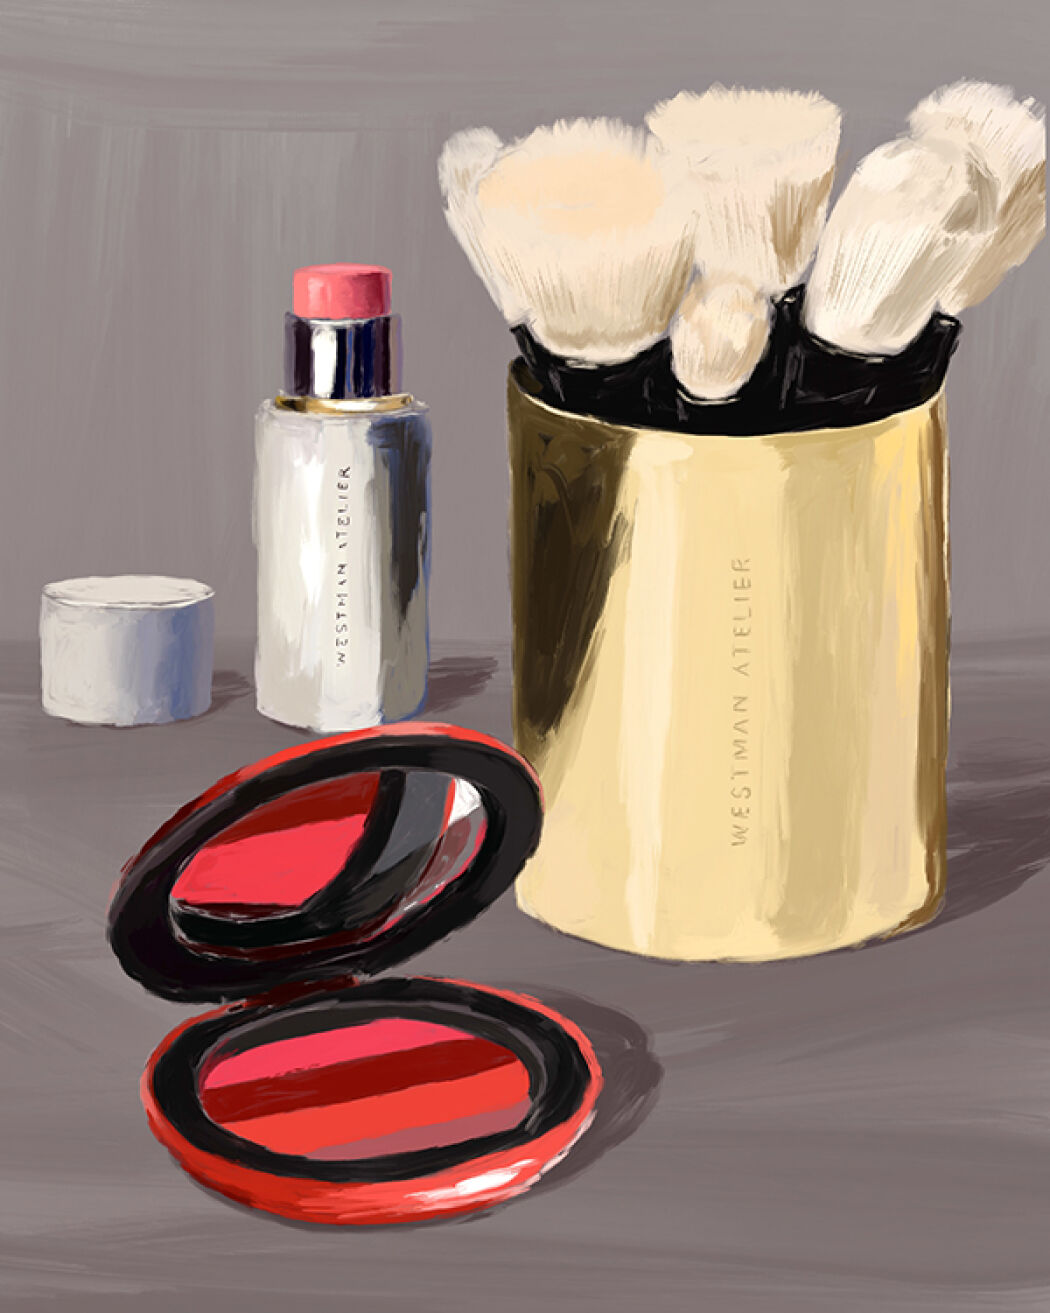 Beauty make up illustration by Christina Gliha for Westman Atelier